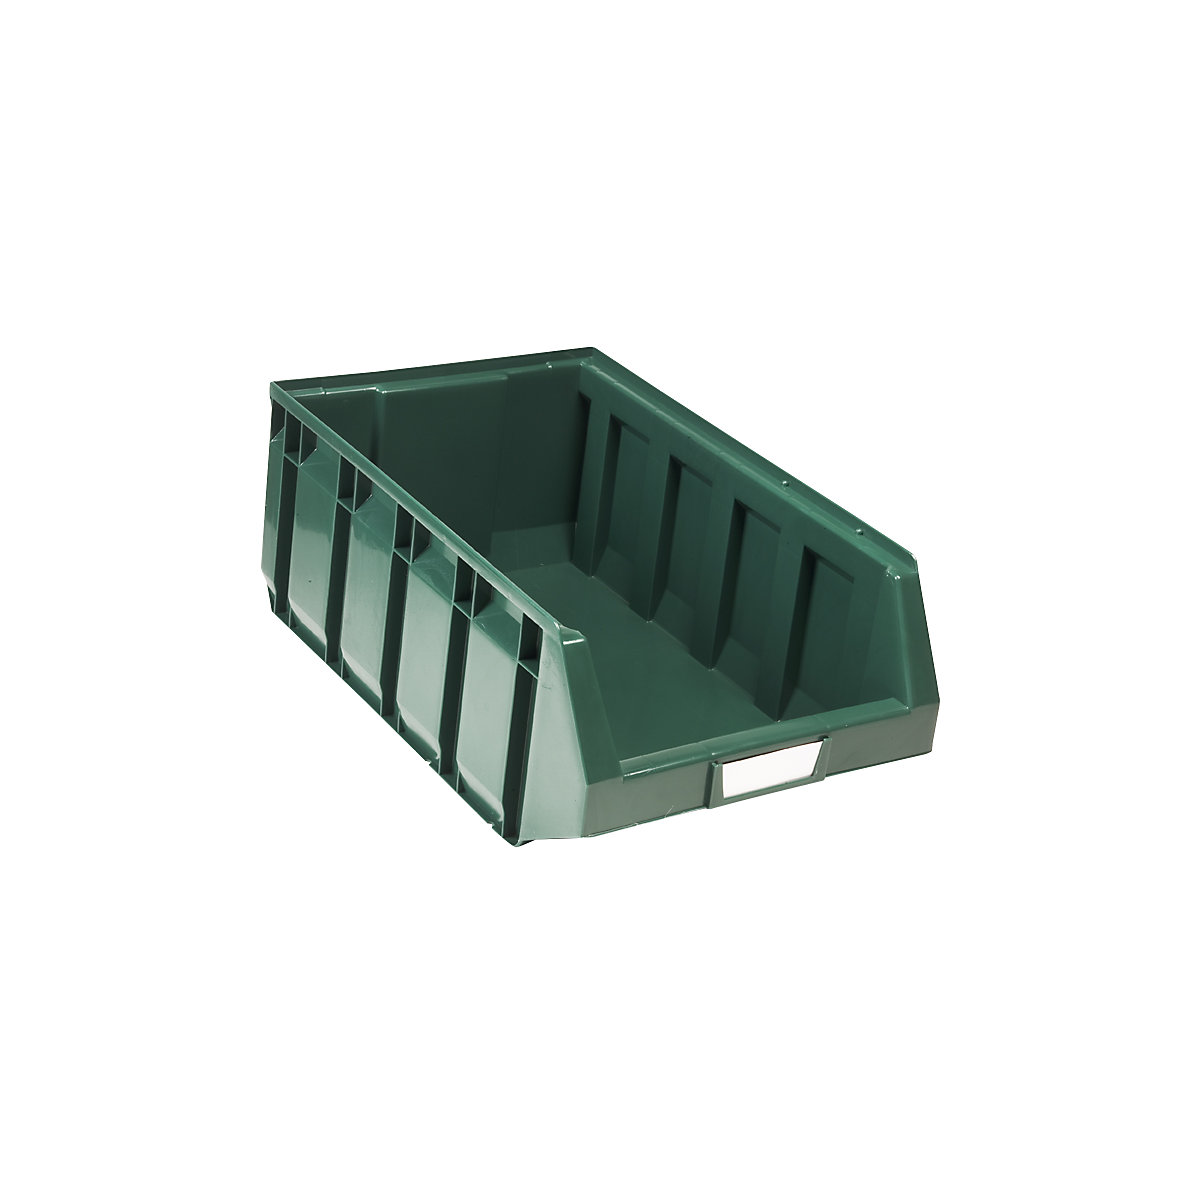 Open fronted storage bin made of polyethylene, LxWxH 485 x 298 x 189 mm, green, pack of 12-9